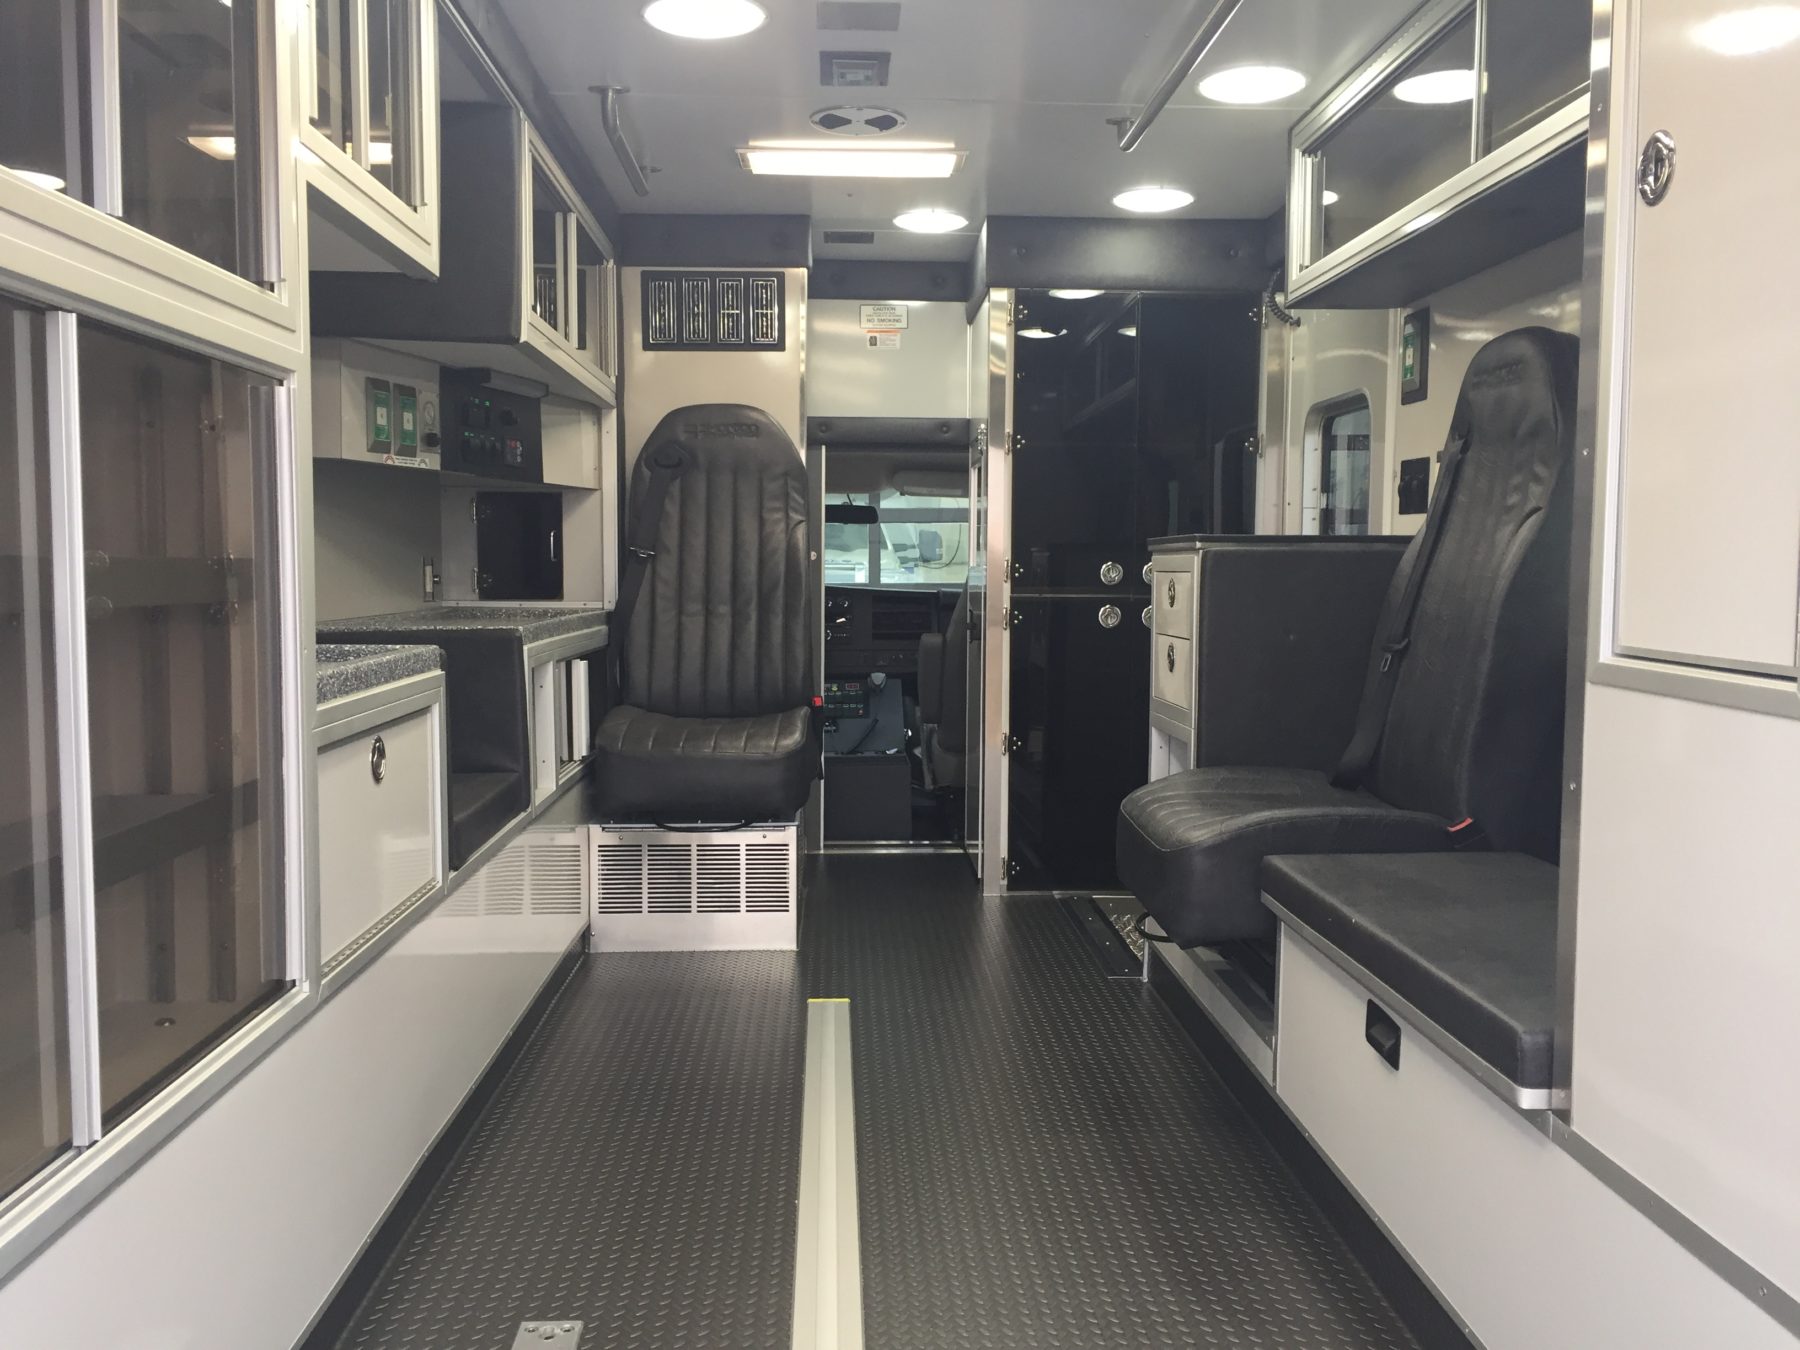 2019 Chevrolet G4500 Type 3 Ambulance For Sale – Picture 2